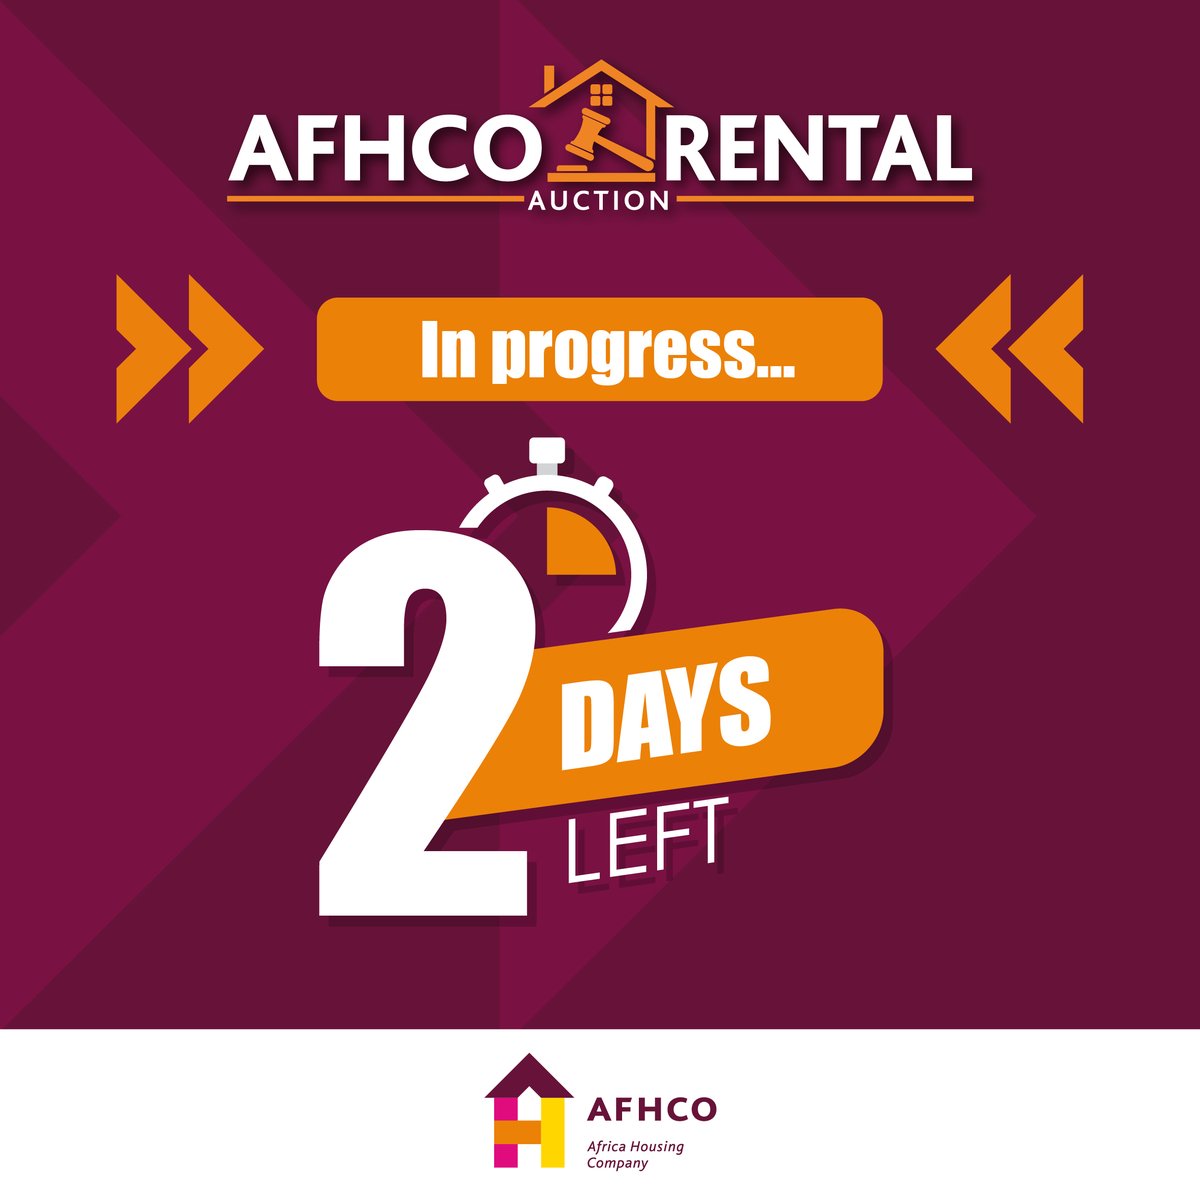 Use this opportunity to get the home of your dreams. Two days left of the Rental Auction. Reserve your seat now: bit.ly/49TGaNN
#Rental #AFHCORentalAuction #innercityrentals #cityliving #MoveUp #StaywithAFHCO #apartmentstolet #MoveUpwithAFHCO #AFHCO #propertymanagement